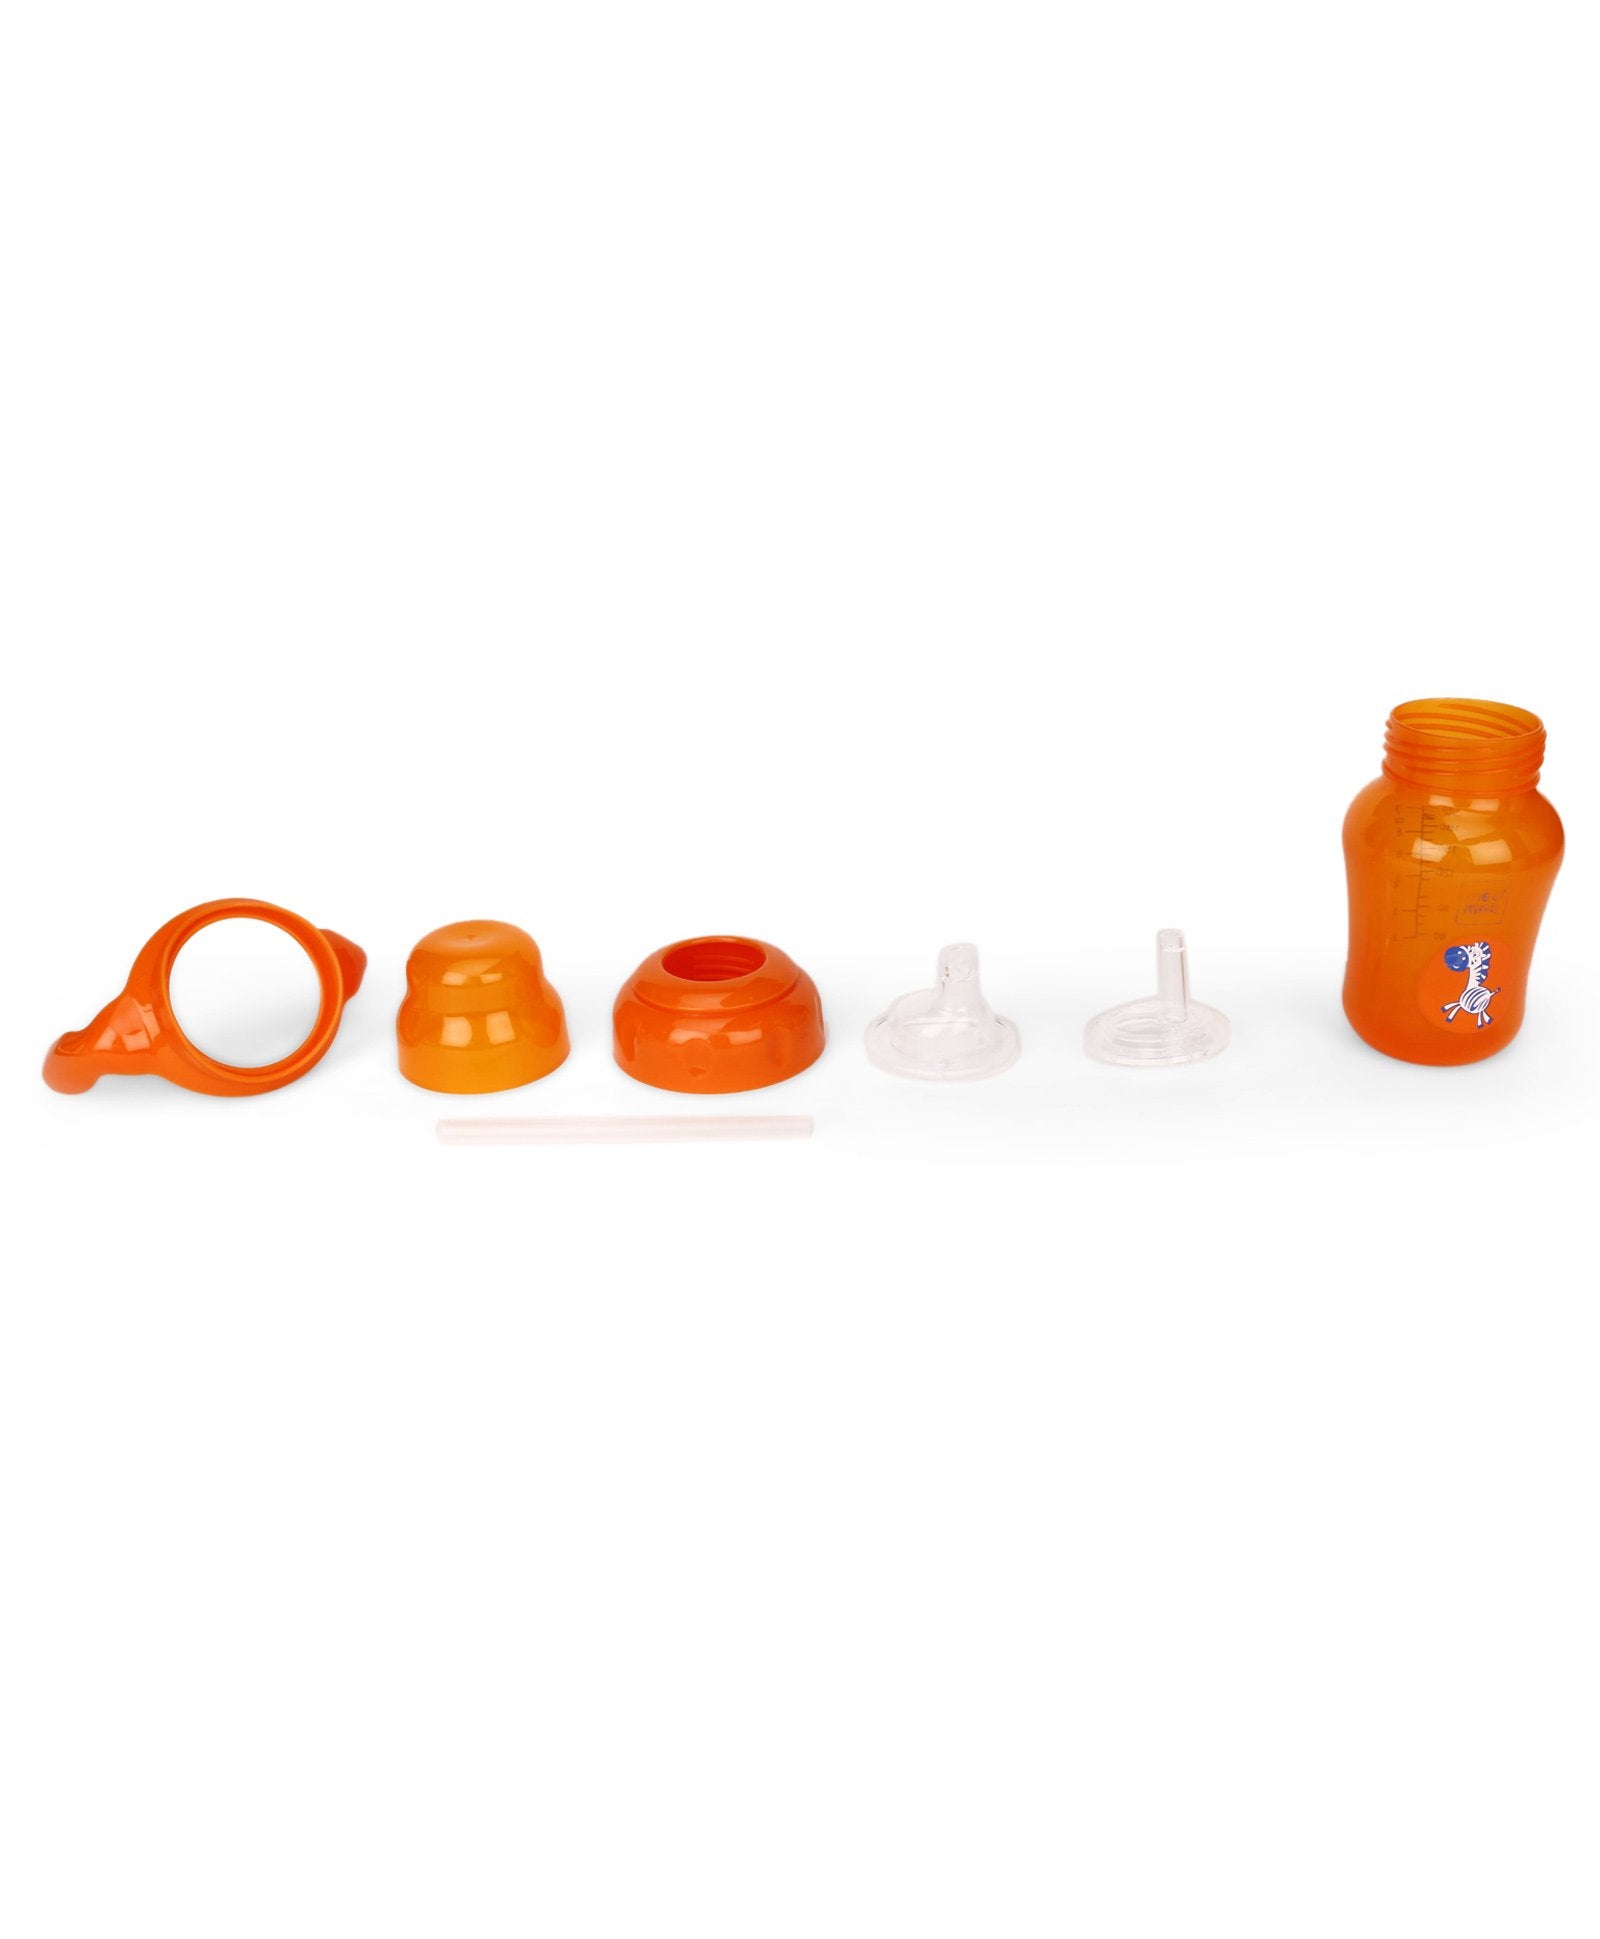 Mee Mee 2 in 1 Spout & straw Sipper Cup 210ml 3m+ Orange